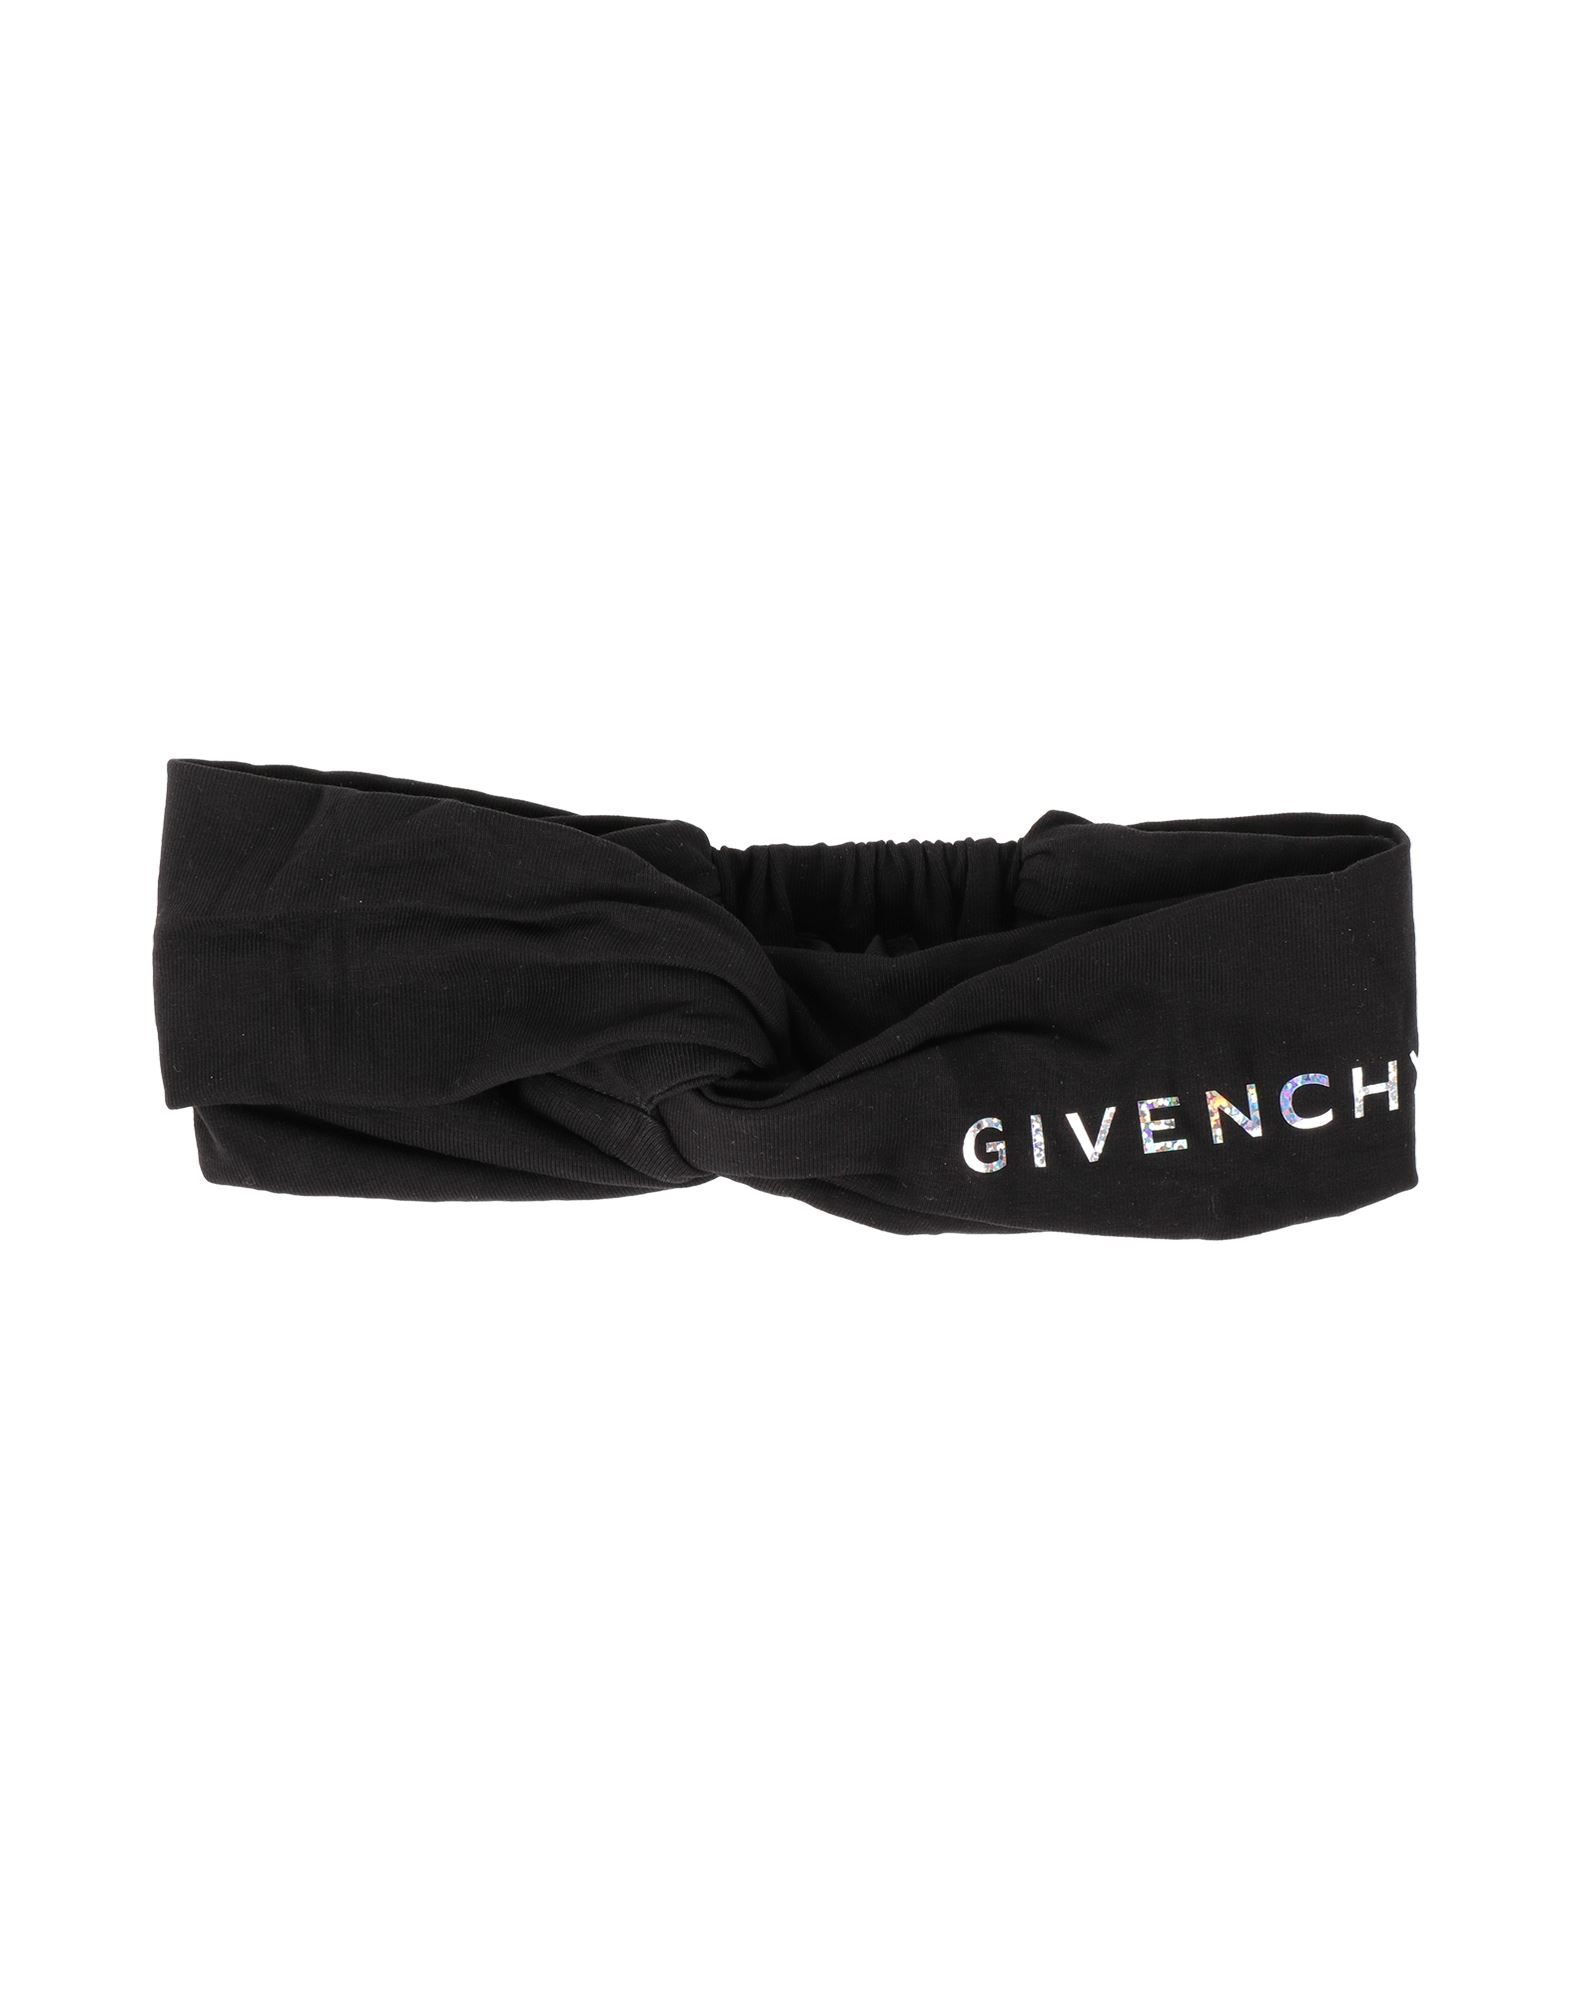 GIVENCHY GIVENCHY HAIR ACCESSORIES